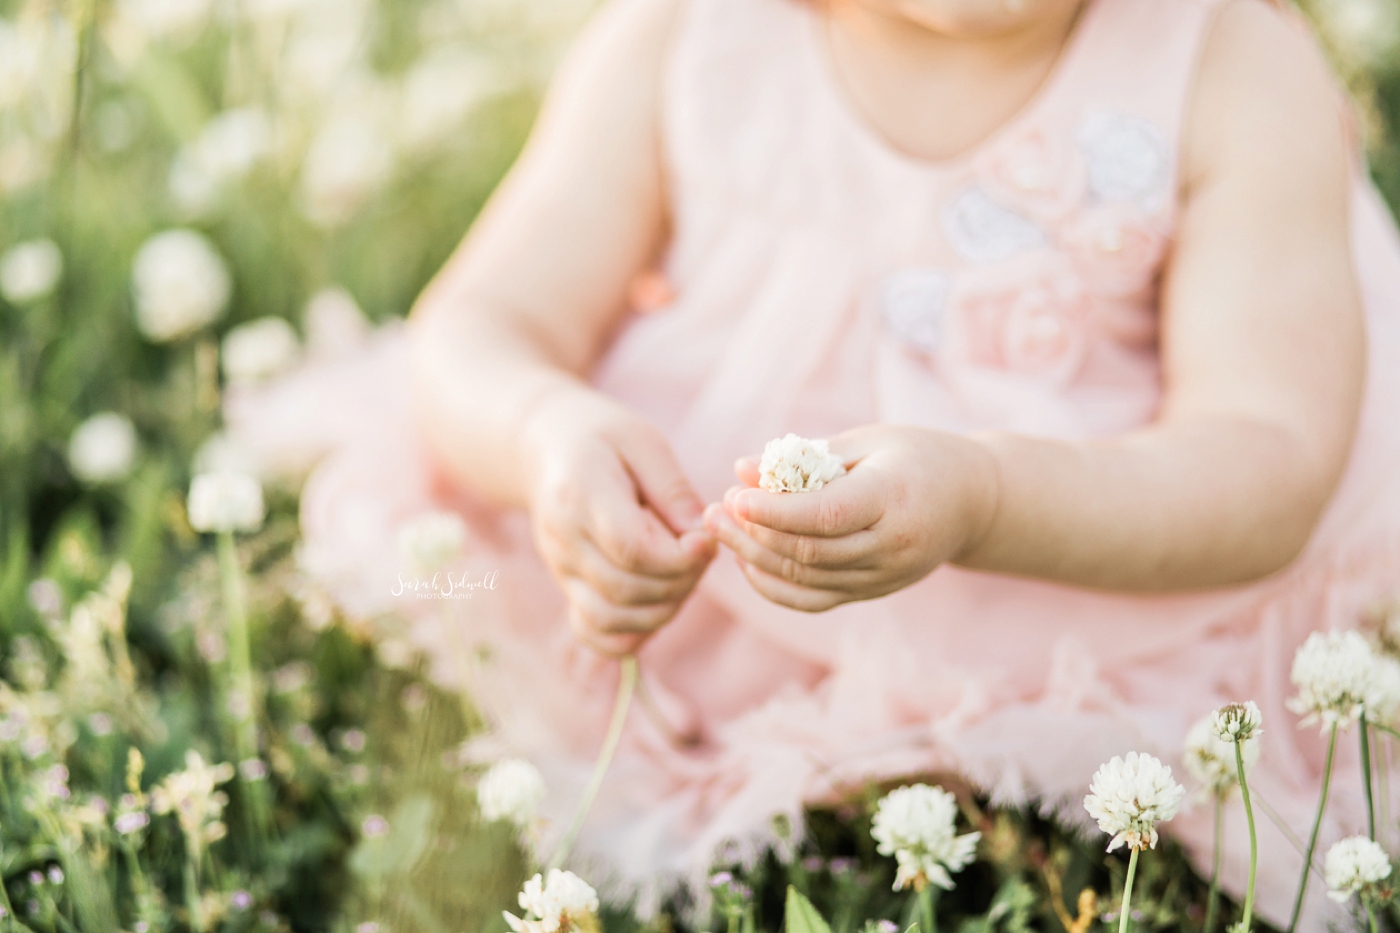 A toddler wearing a pink dress bends down to pick some white flowers. 